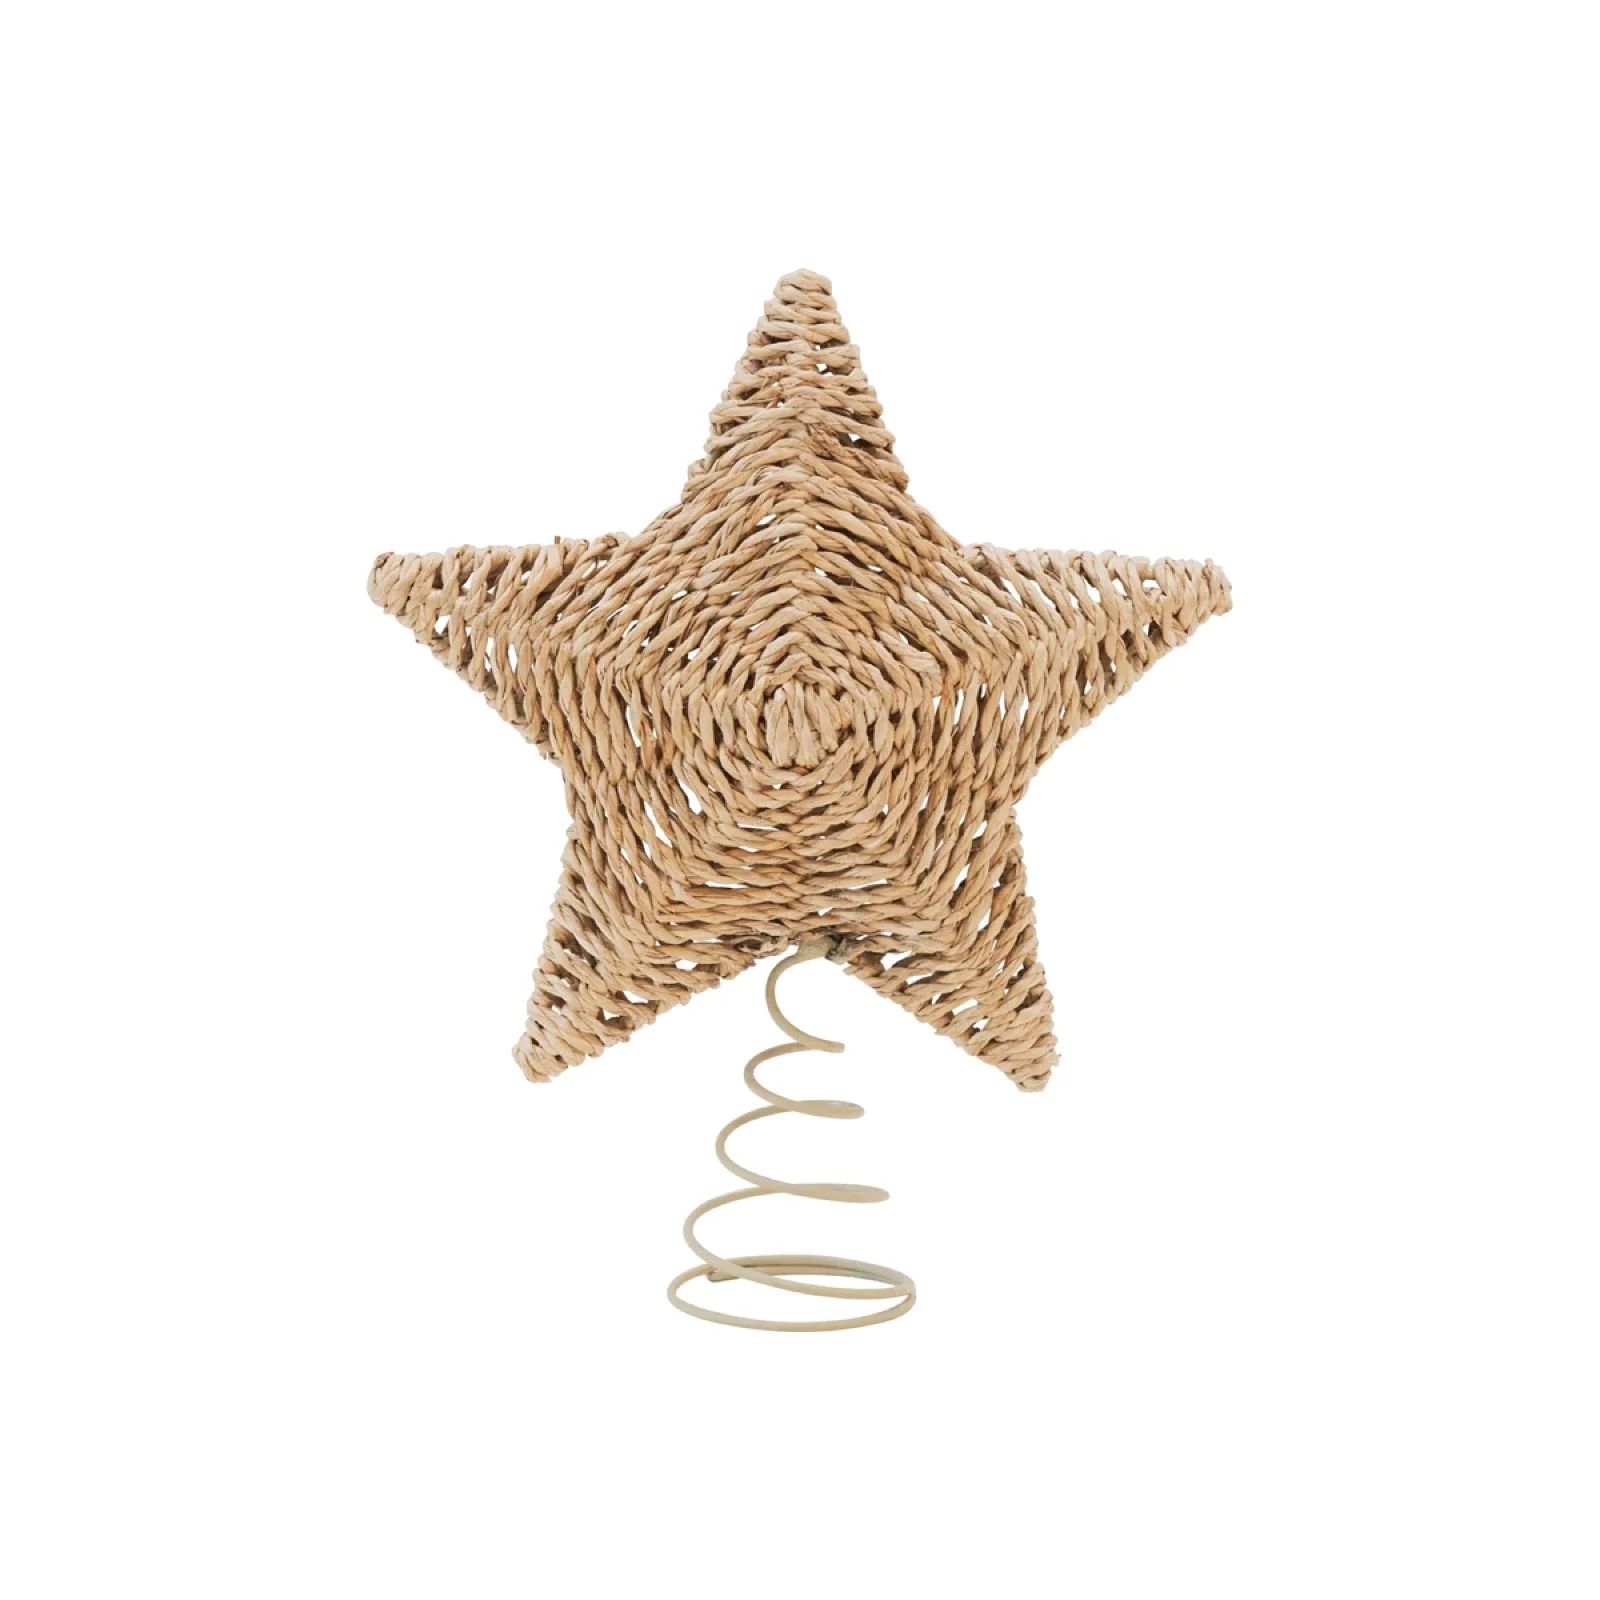 Woven Star Tree Topper | Brooke and Lou